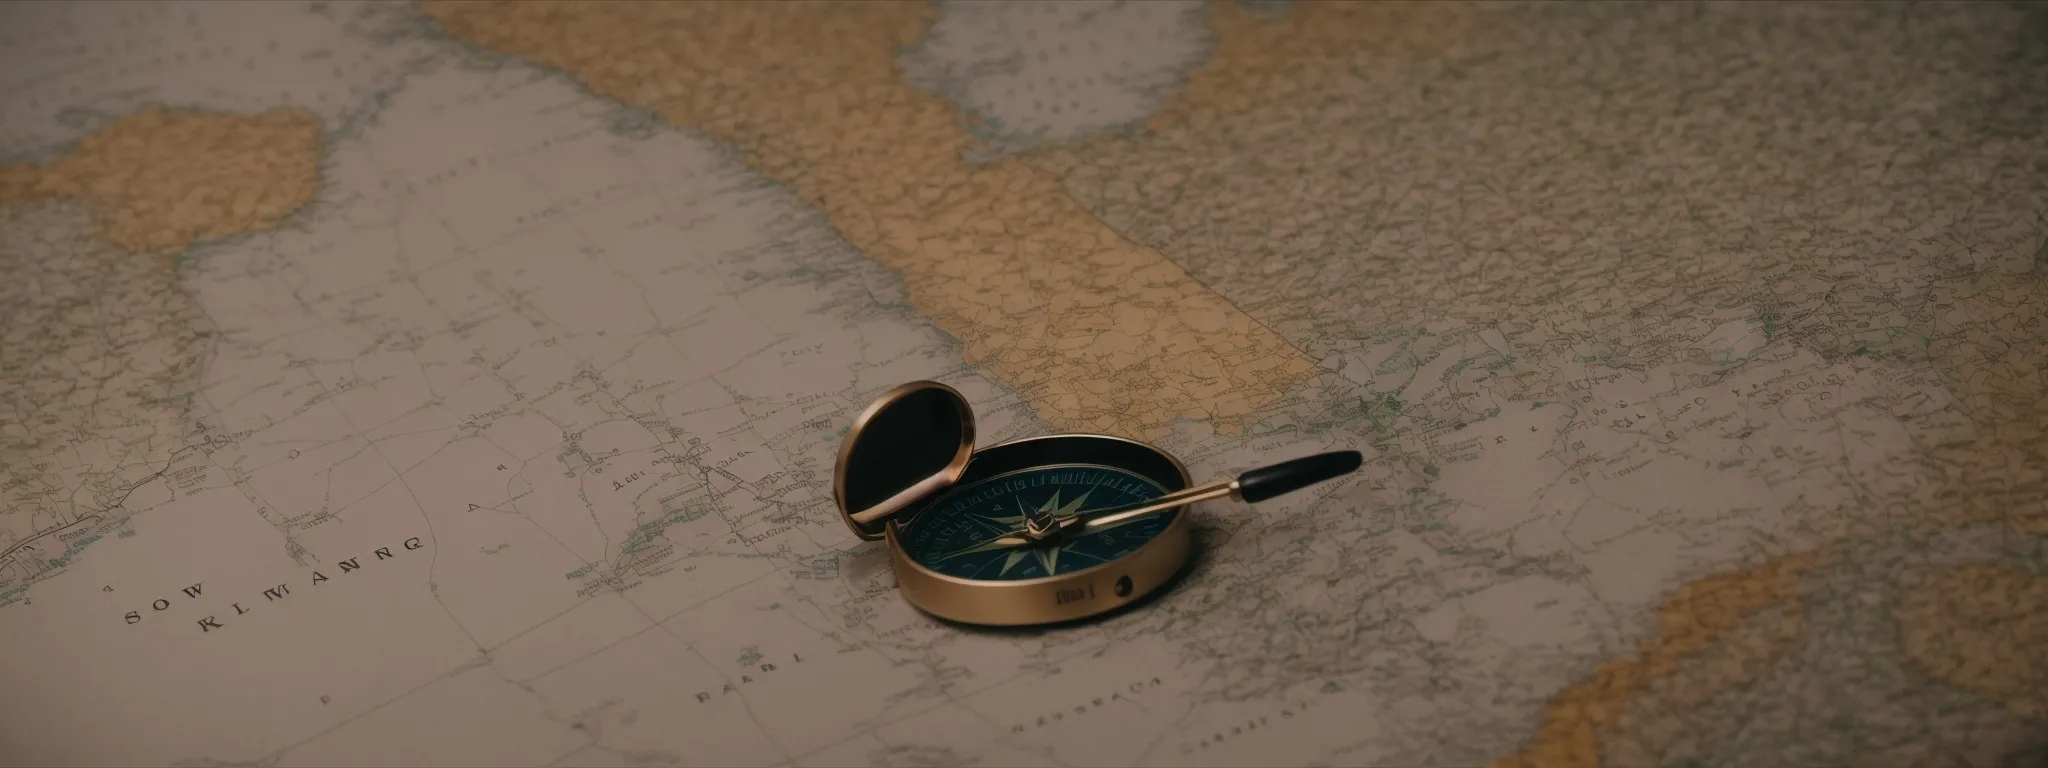 a compass resting on a map, symbolizing the strategic guidance keyword research provides in the journey of seo.